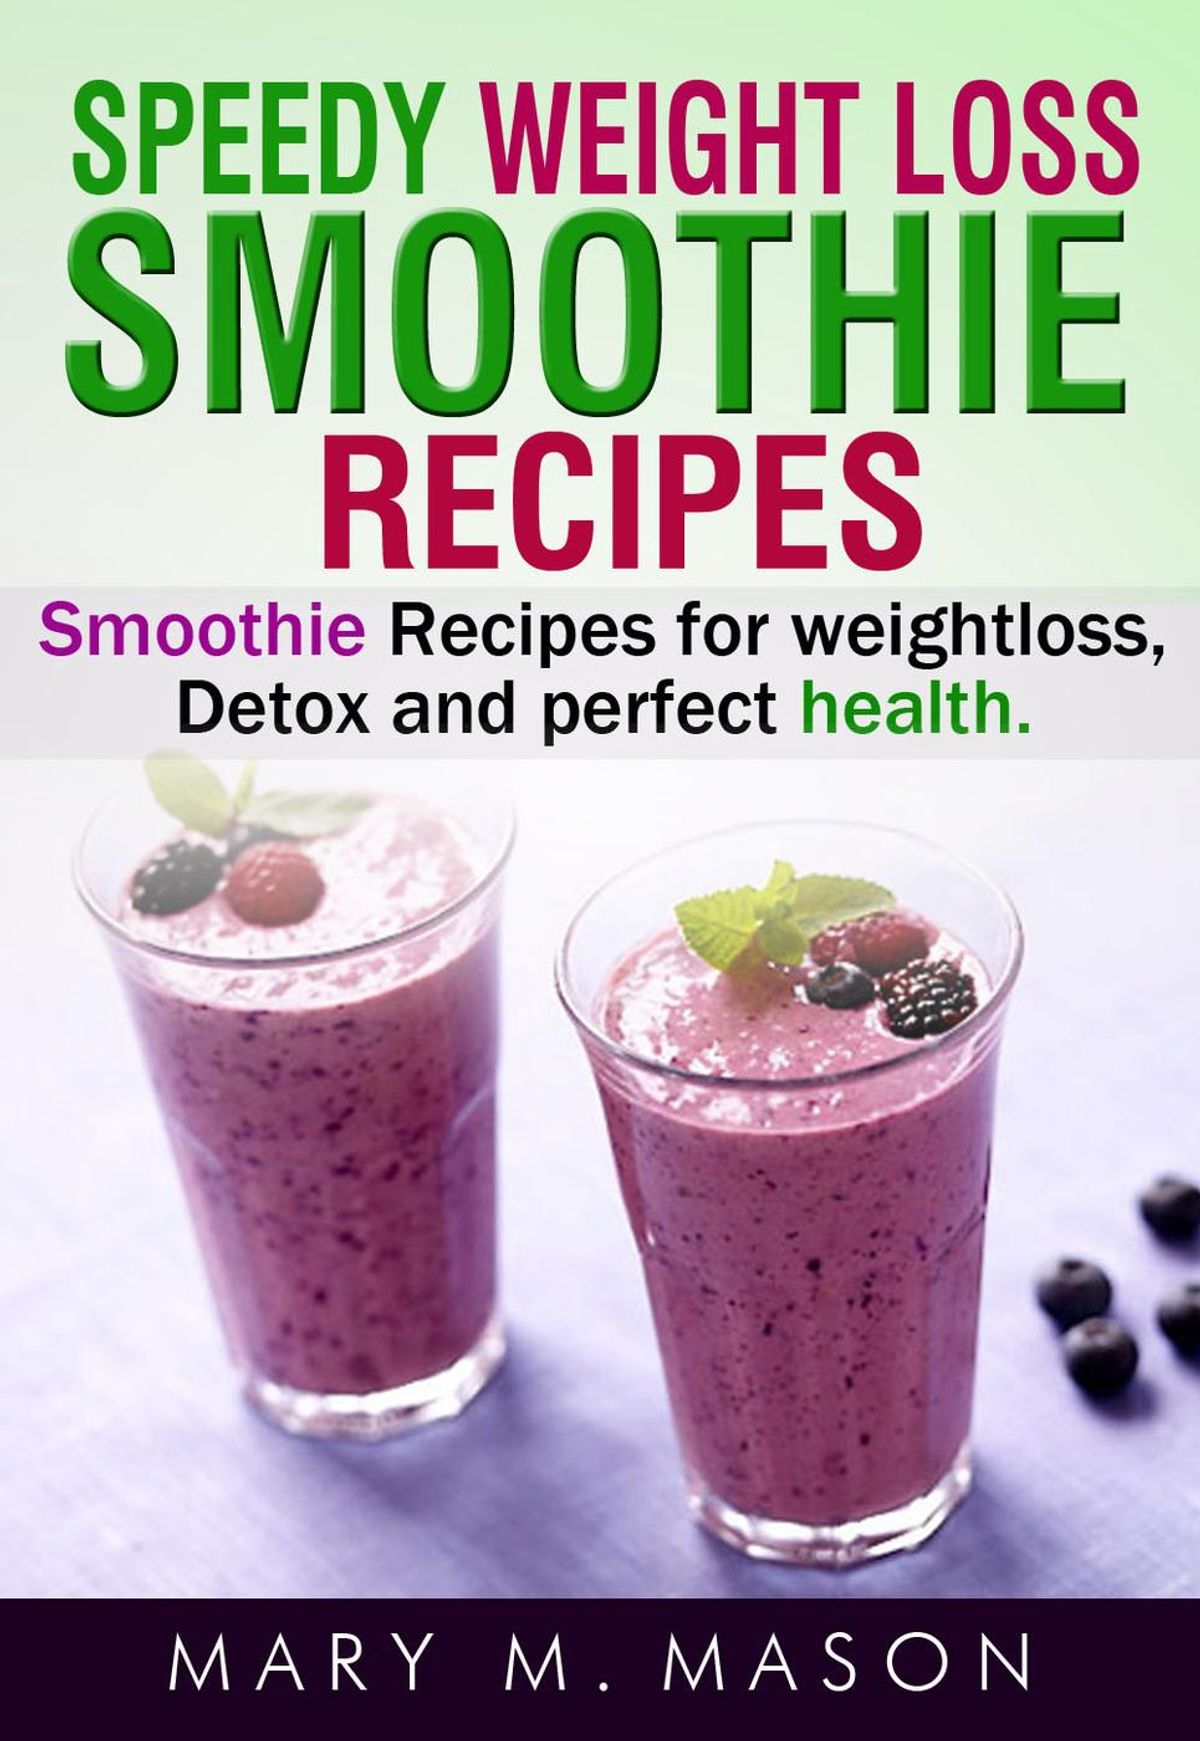 healthy smoothies for weight loss jackson nash inti